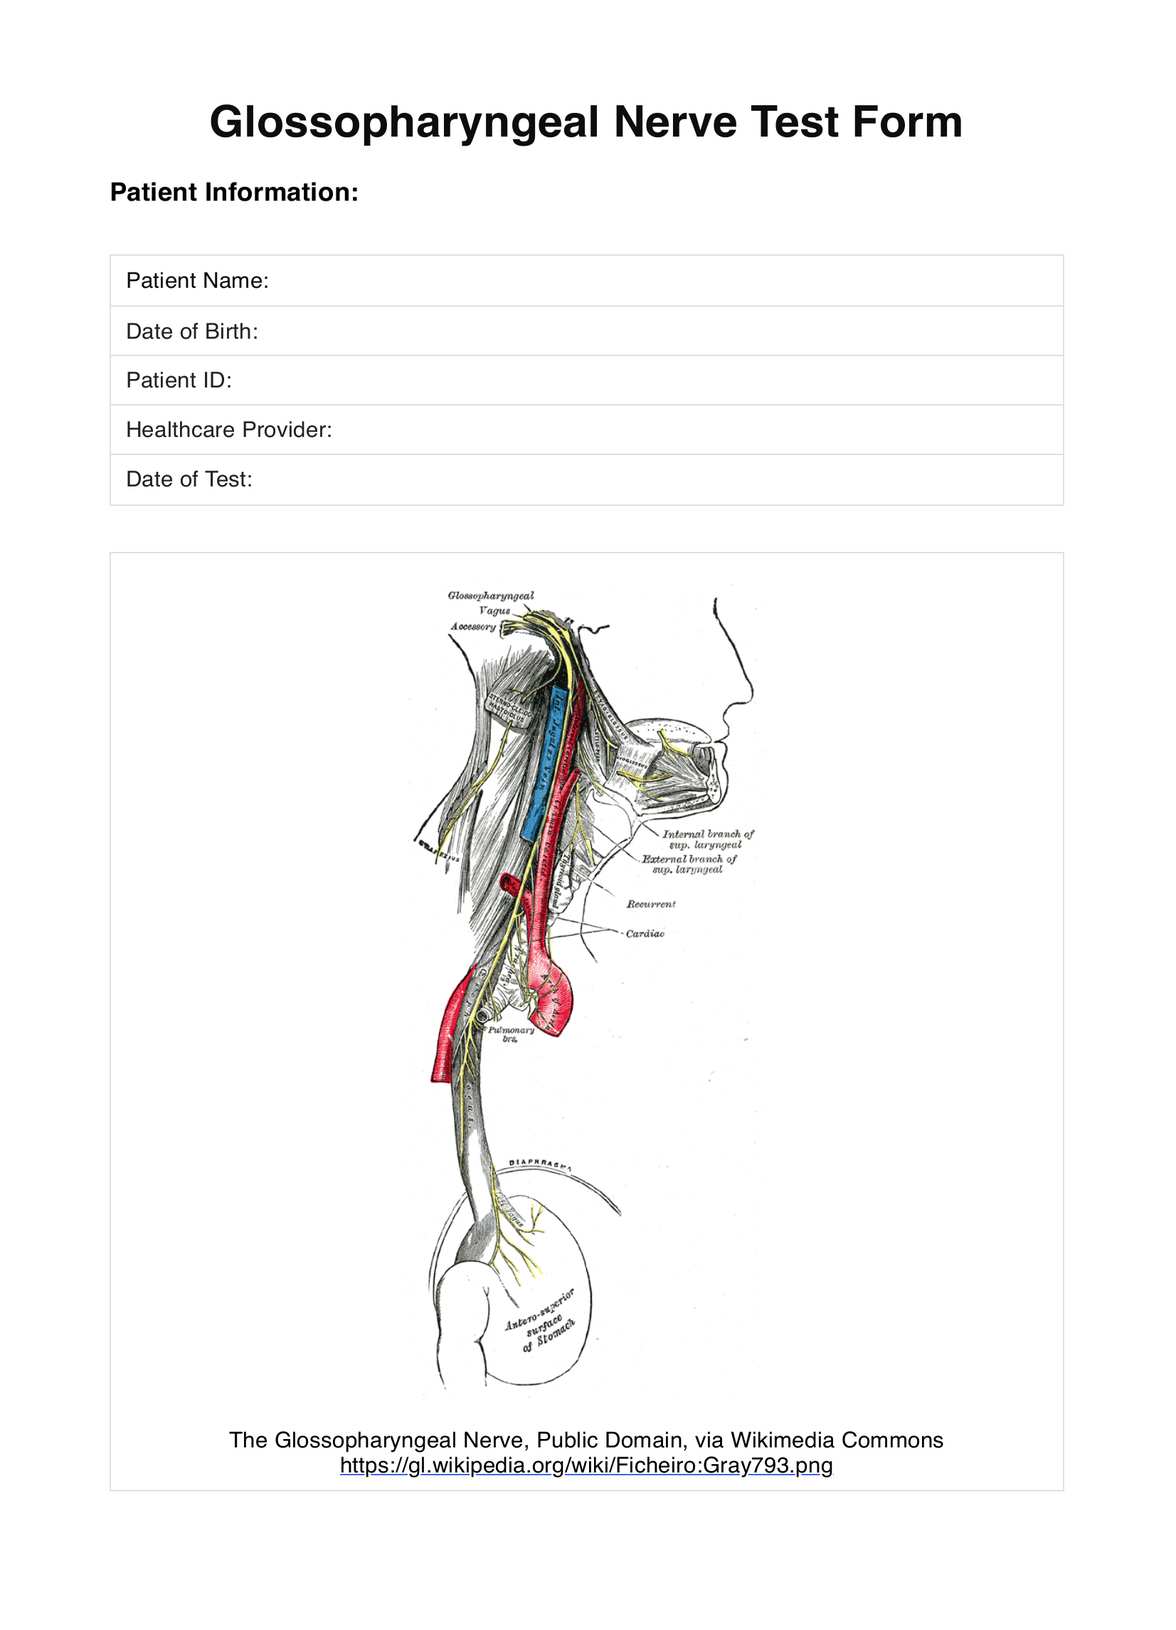 Glossopharyngeal Nerve Test PDF Example